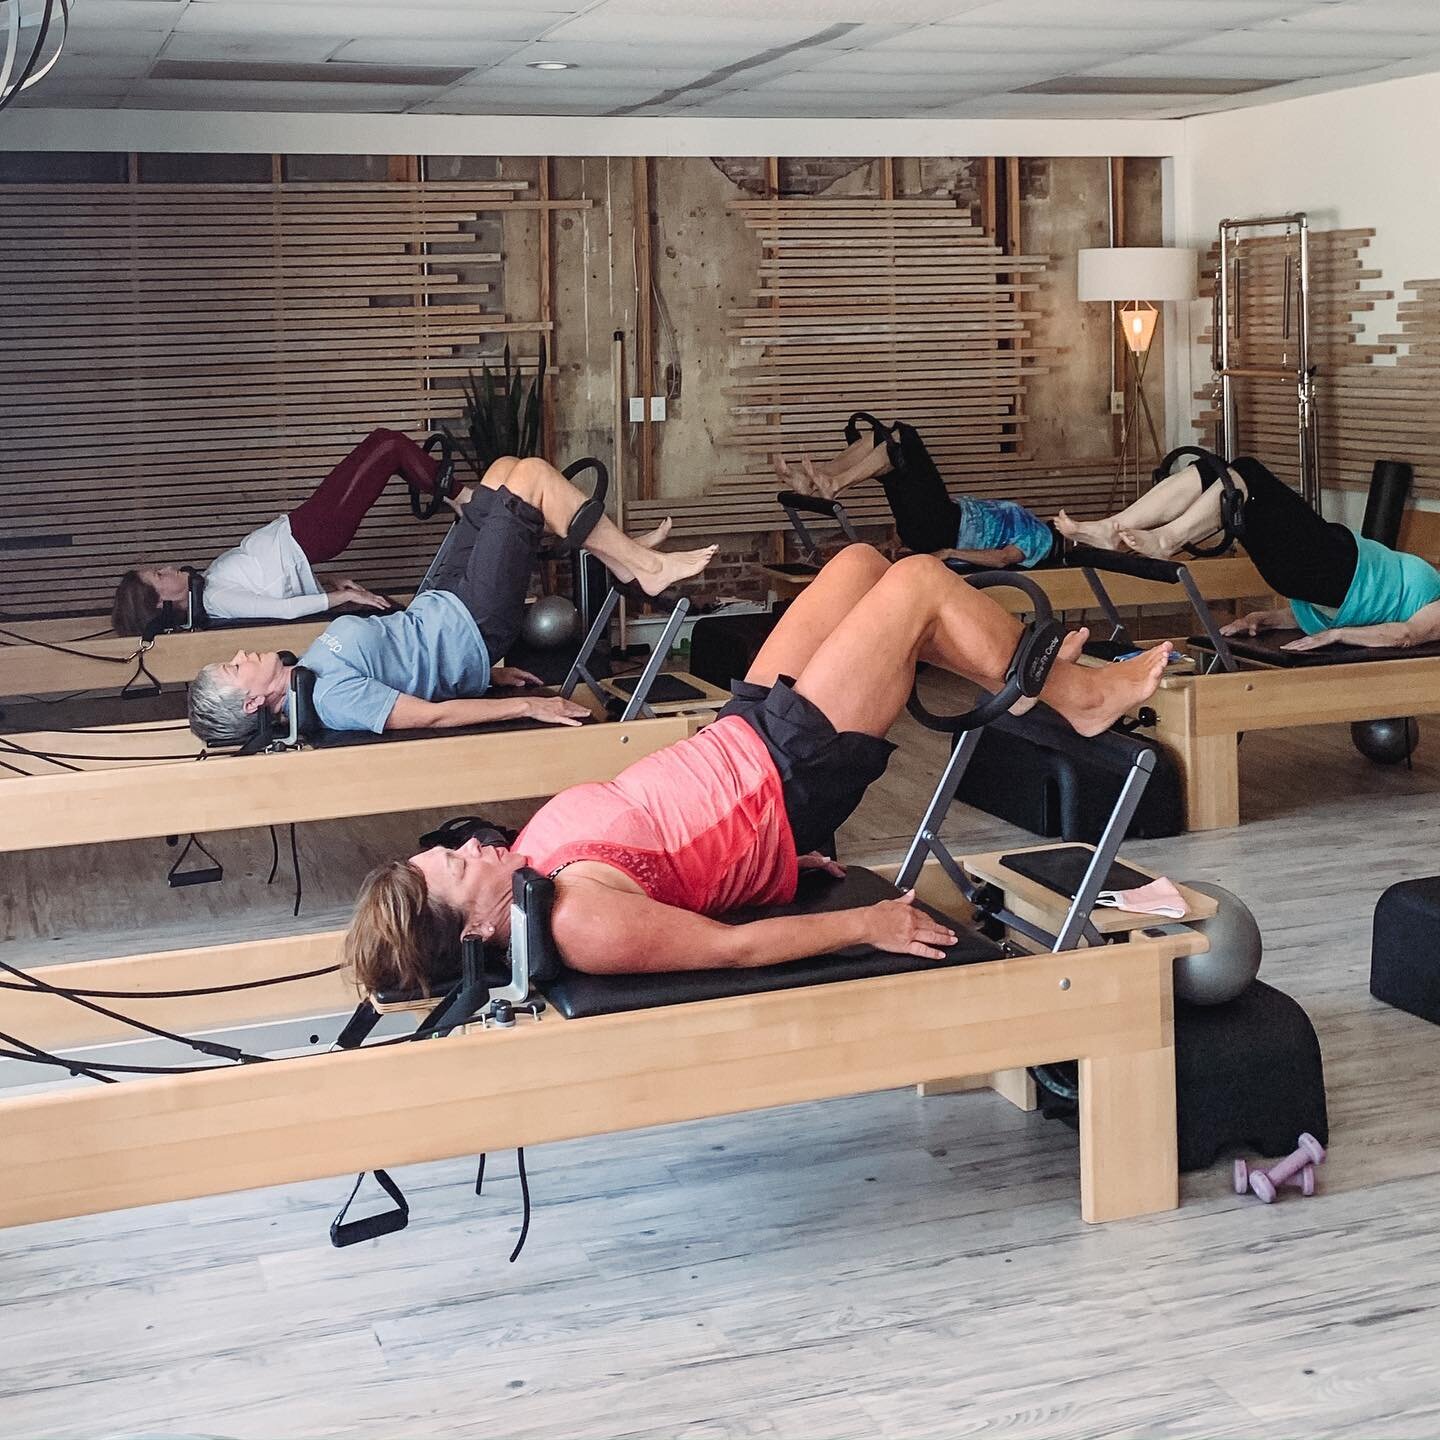 Our clients are SO STRONG🔥🔥🔥
&bull;
We have a few spots remaining in our 5:30am, 6:30am, 7:30am, and 4:30pm classes tomorrow (August 11). 
&bull;
To sign up, DM us, download the Midtown Pilates app, or contact us at 662-722-1038. The best time to 